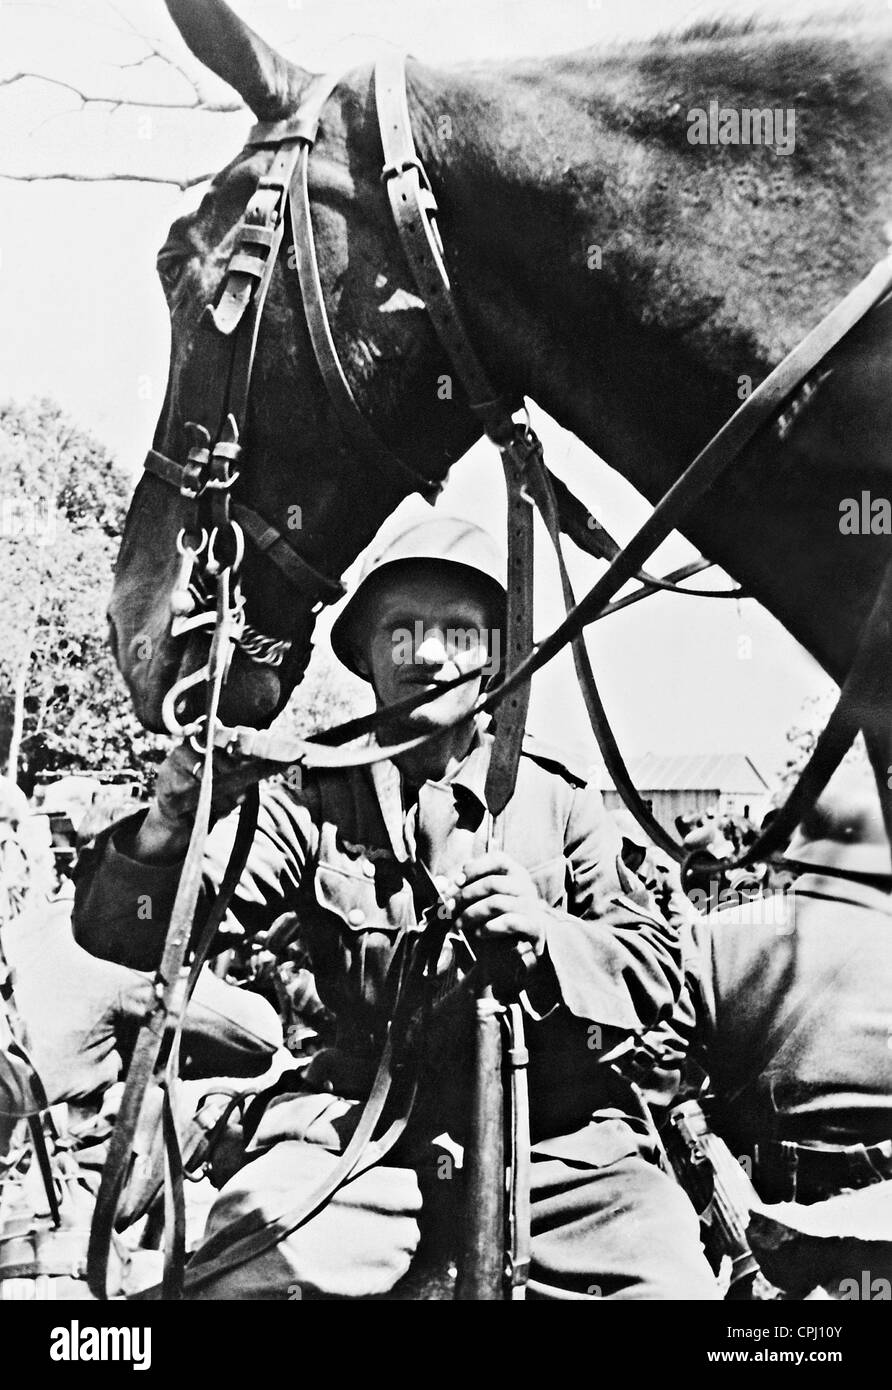 German rider during the advance in Russia, 1941 Stock Photo